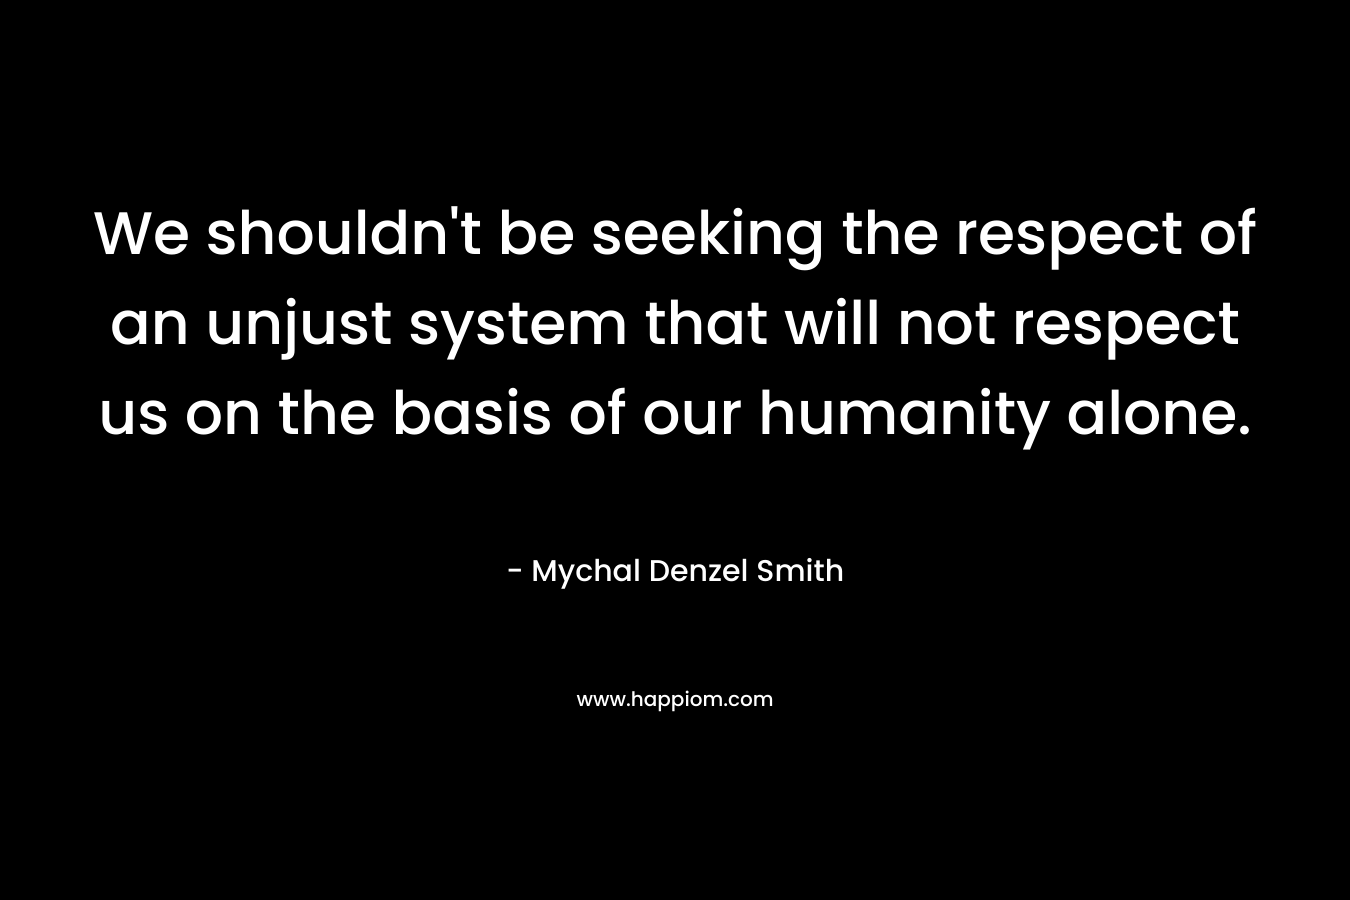 We shouldn’t be seeking the respect of an unjust system that will not respect us on the basis of our humanity alone. – Mychal Denzel Smith